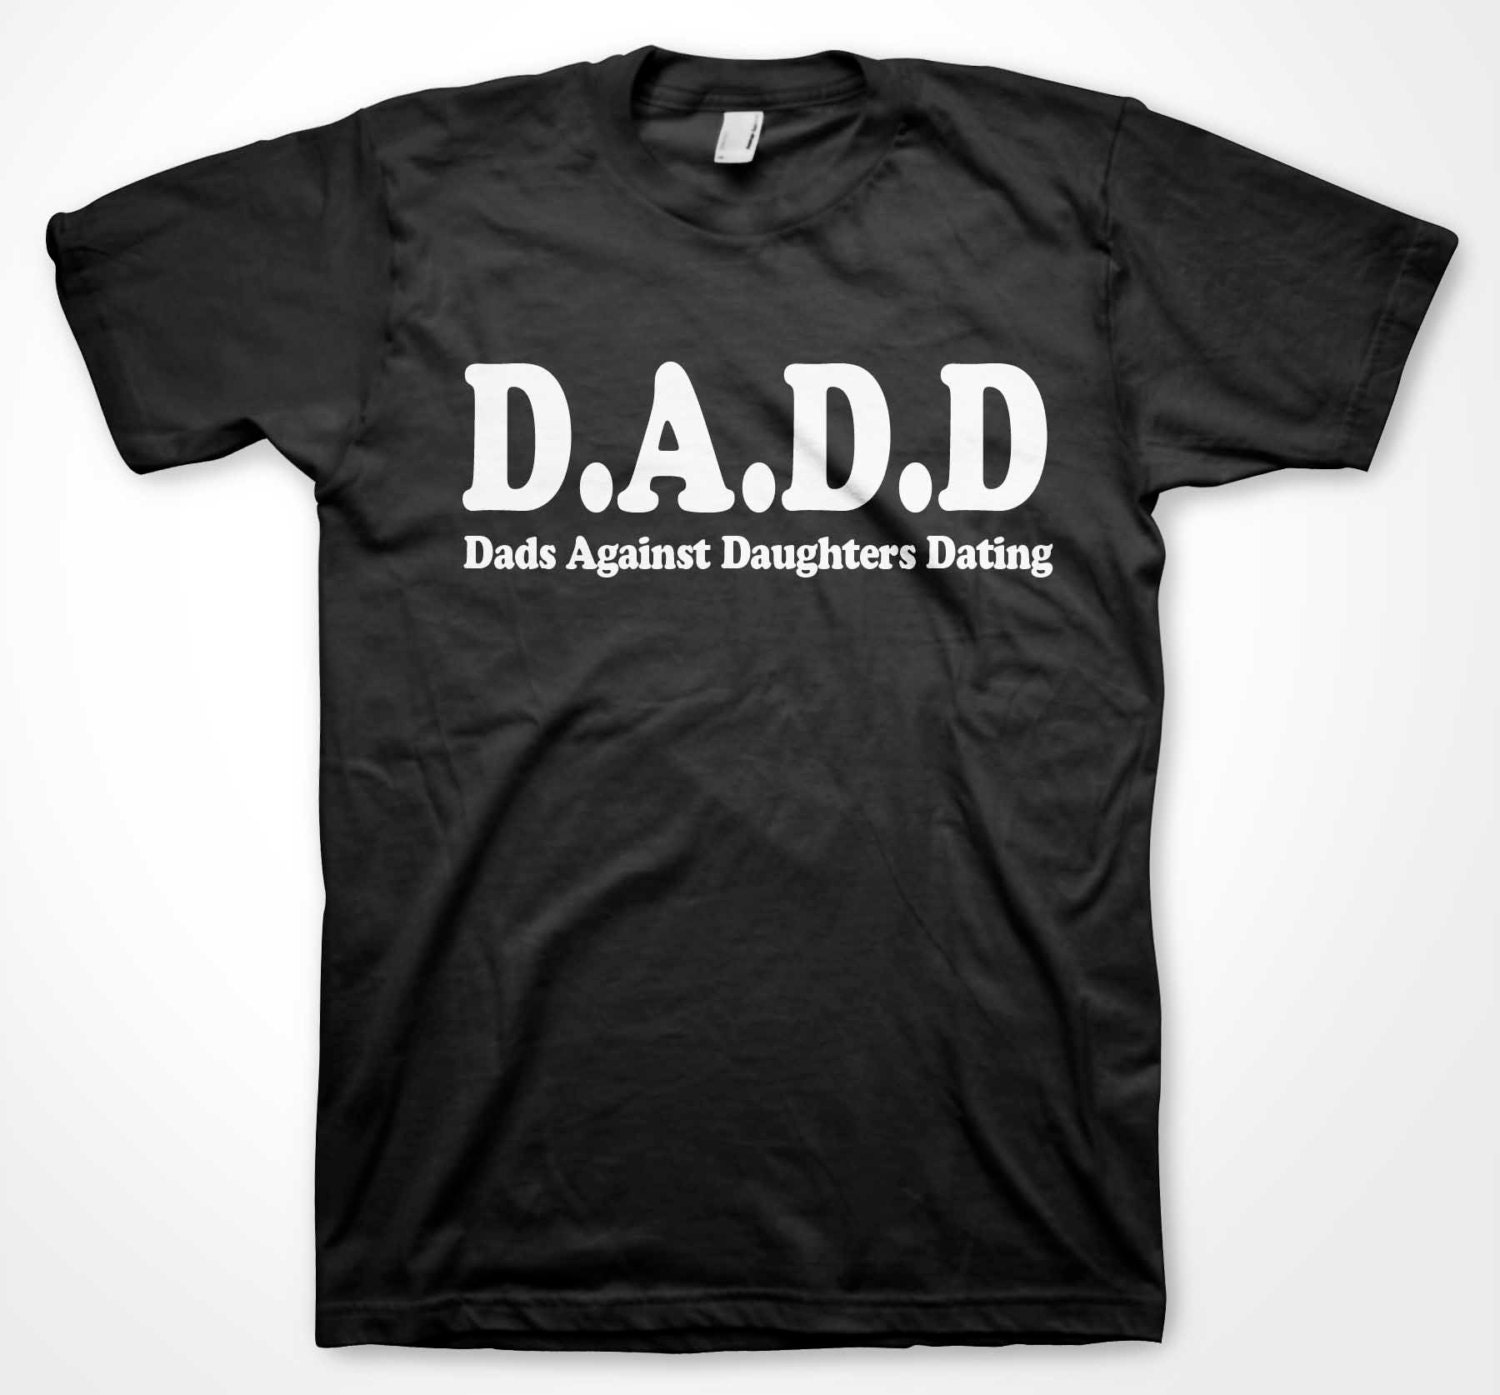 Dadd Dads Against Daughters Dating T Shirt Fathers Day T 1 8946